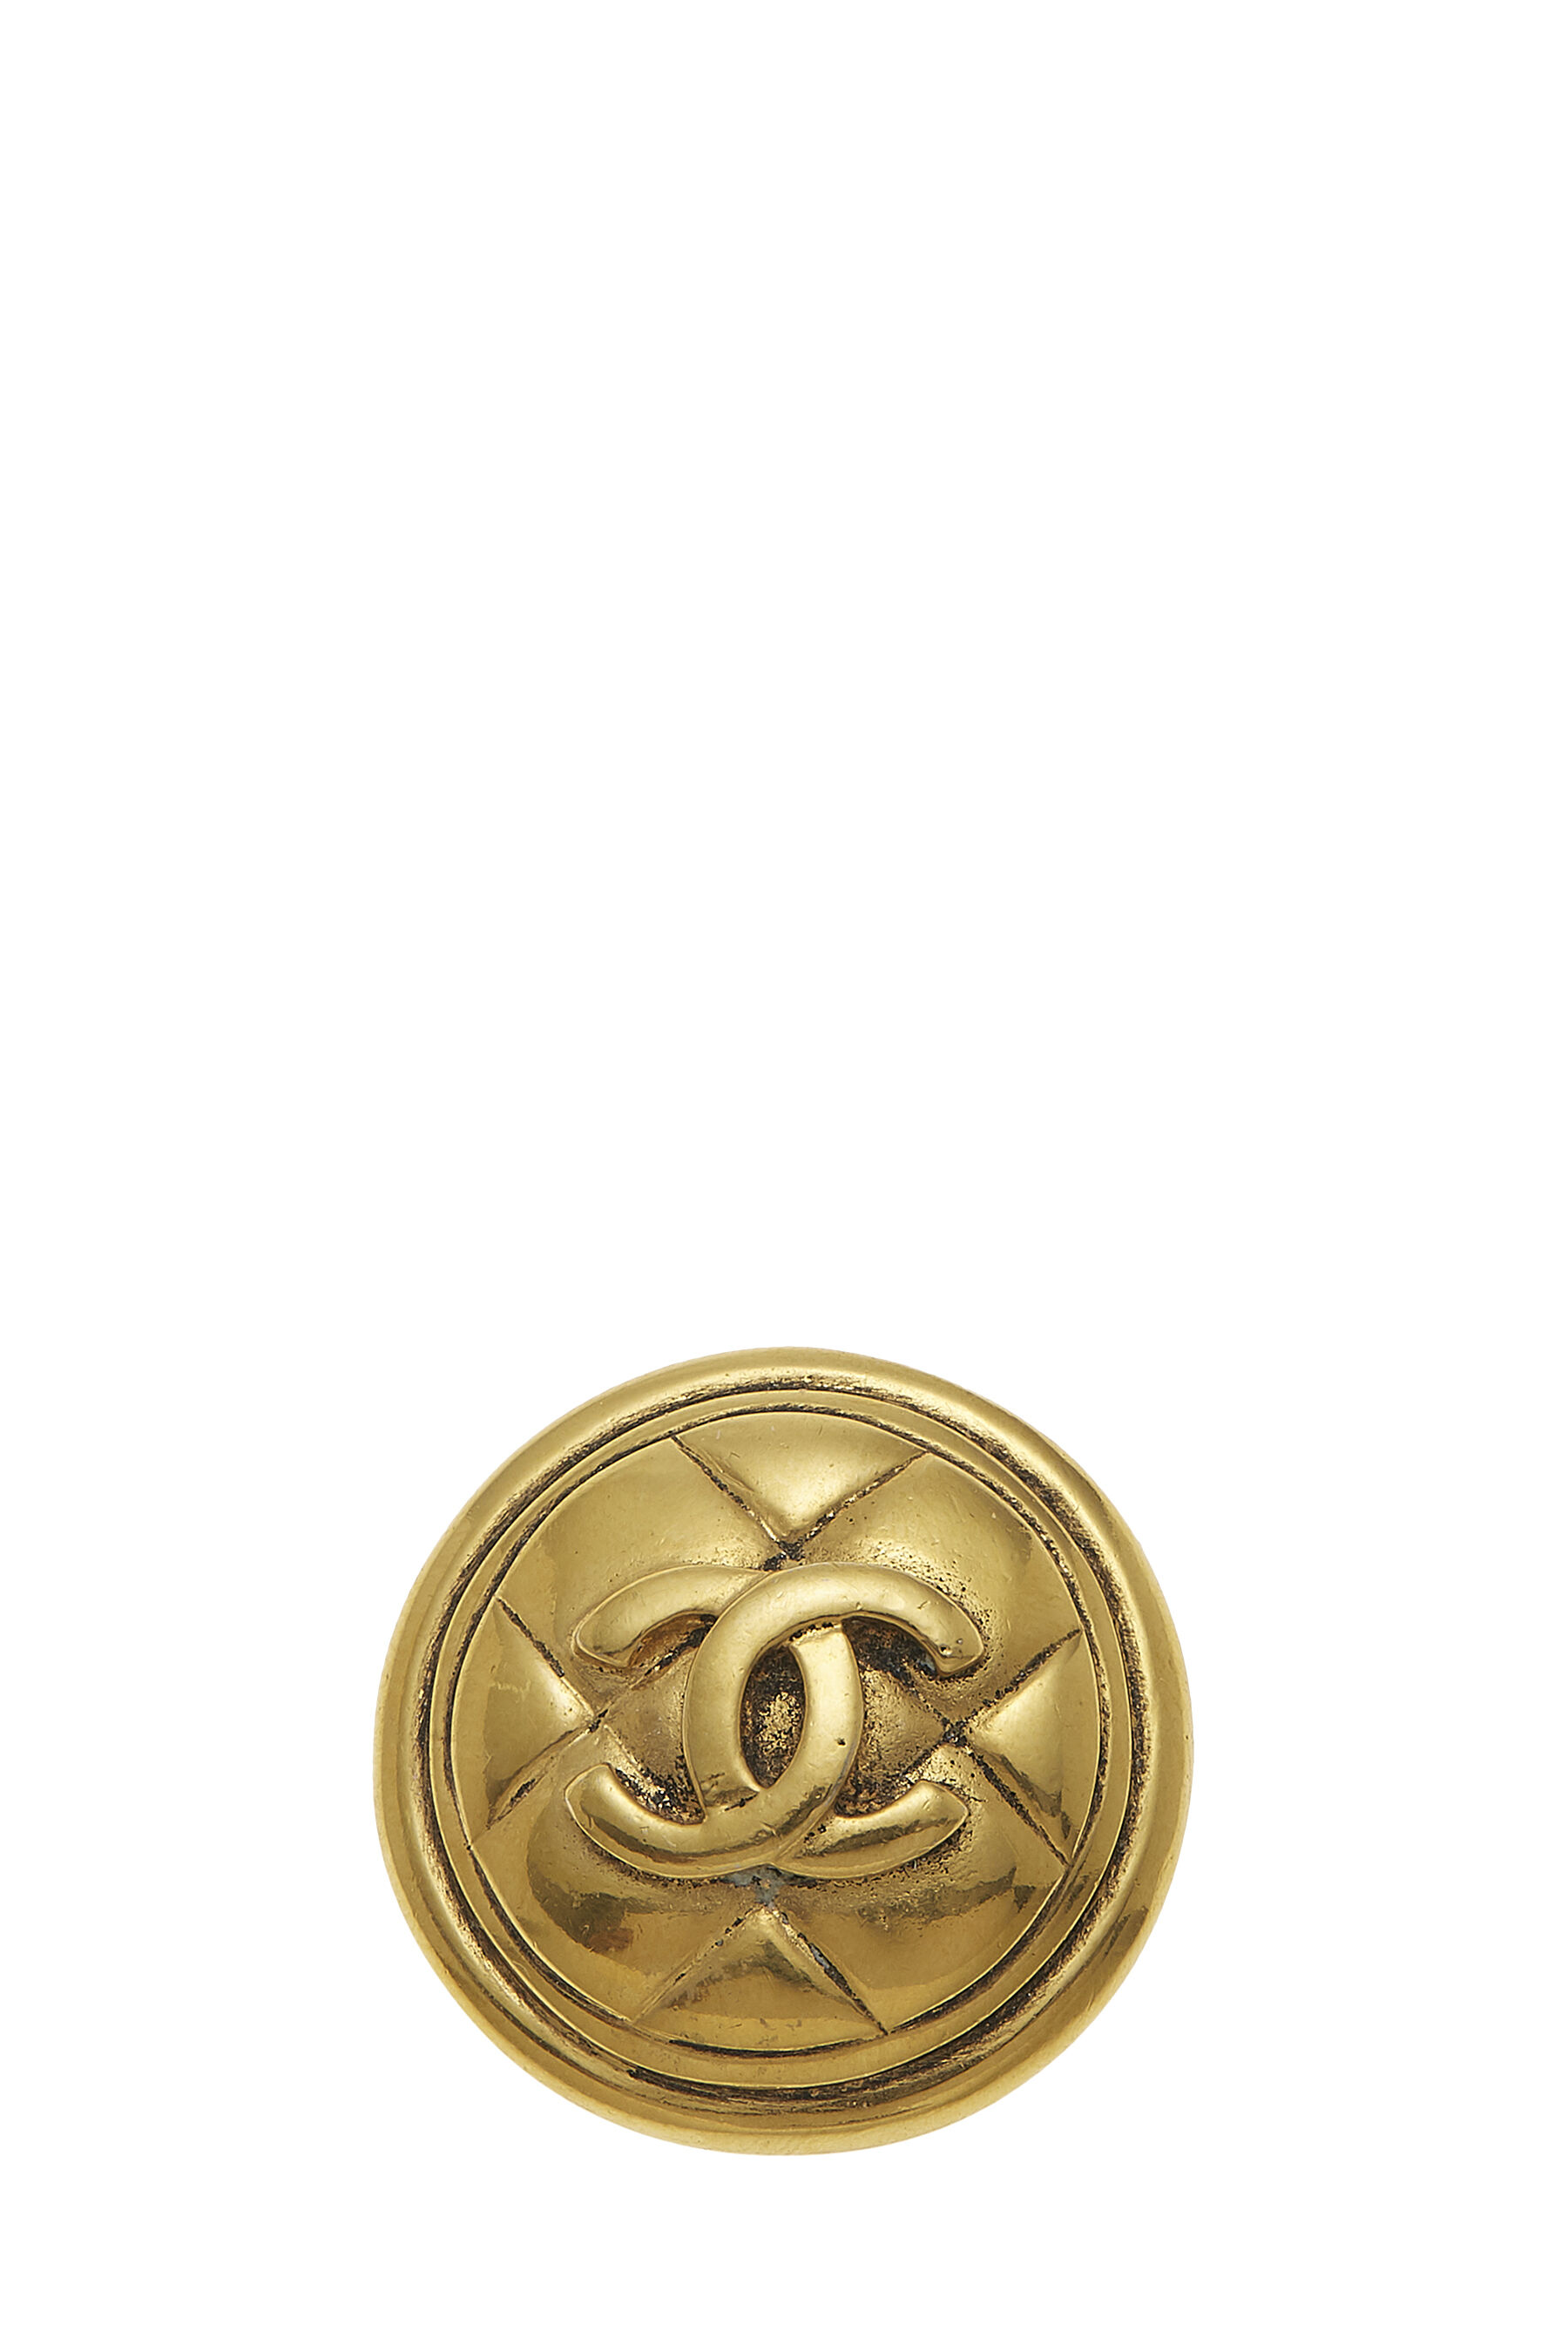 Chanel Gold Round Quilted 'CC' Pin Q6J0NQ17DB008